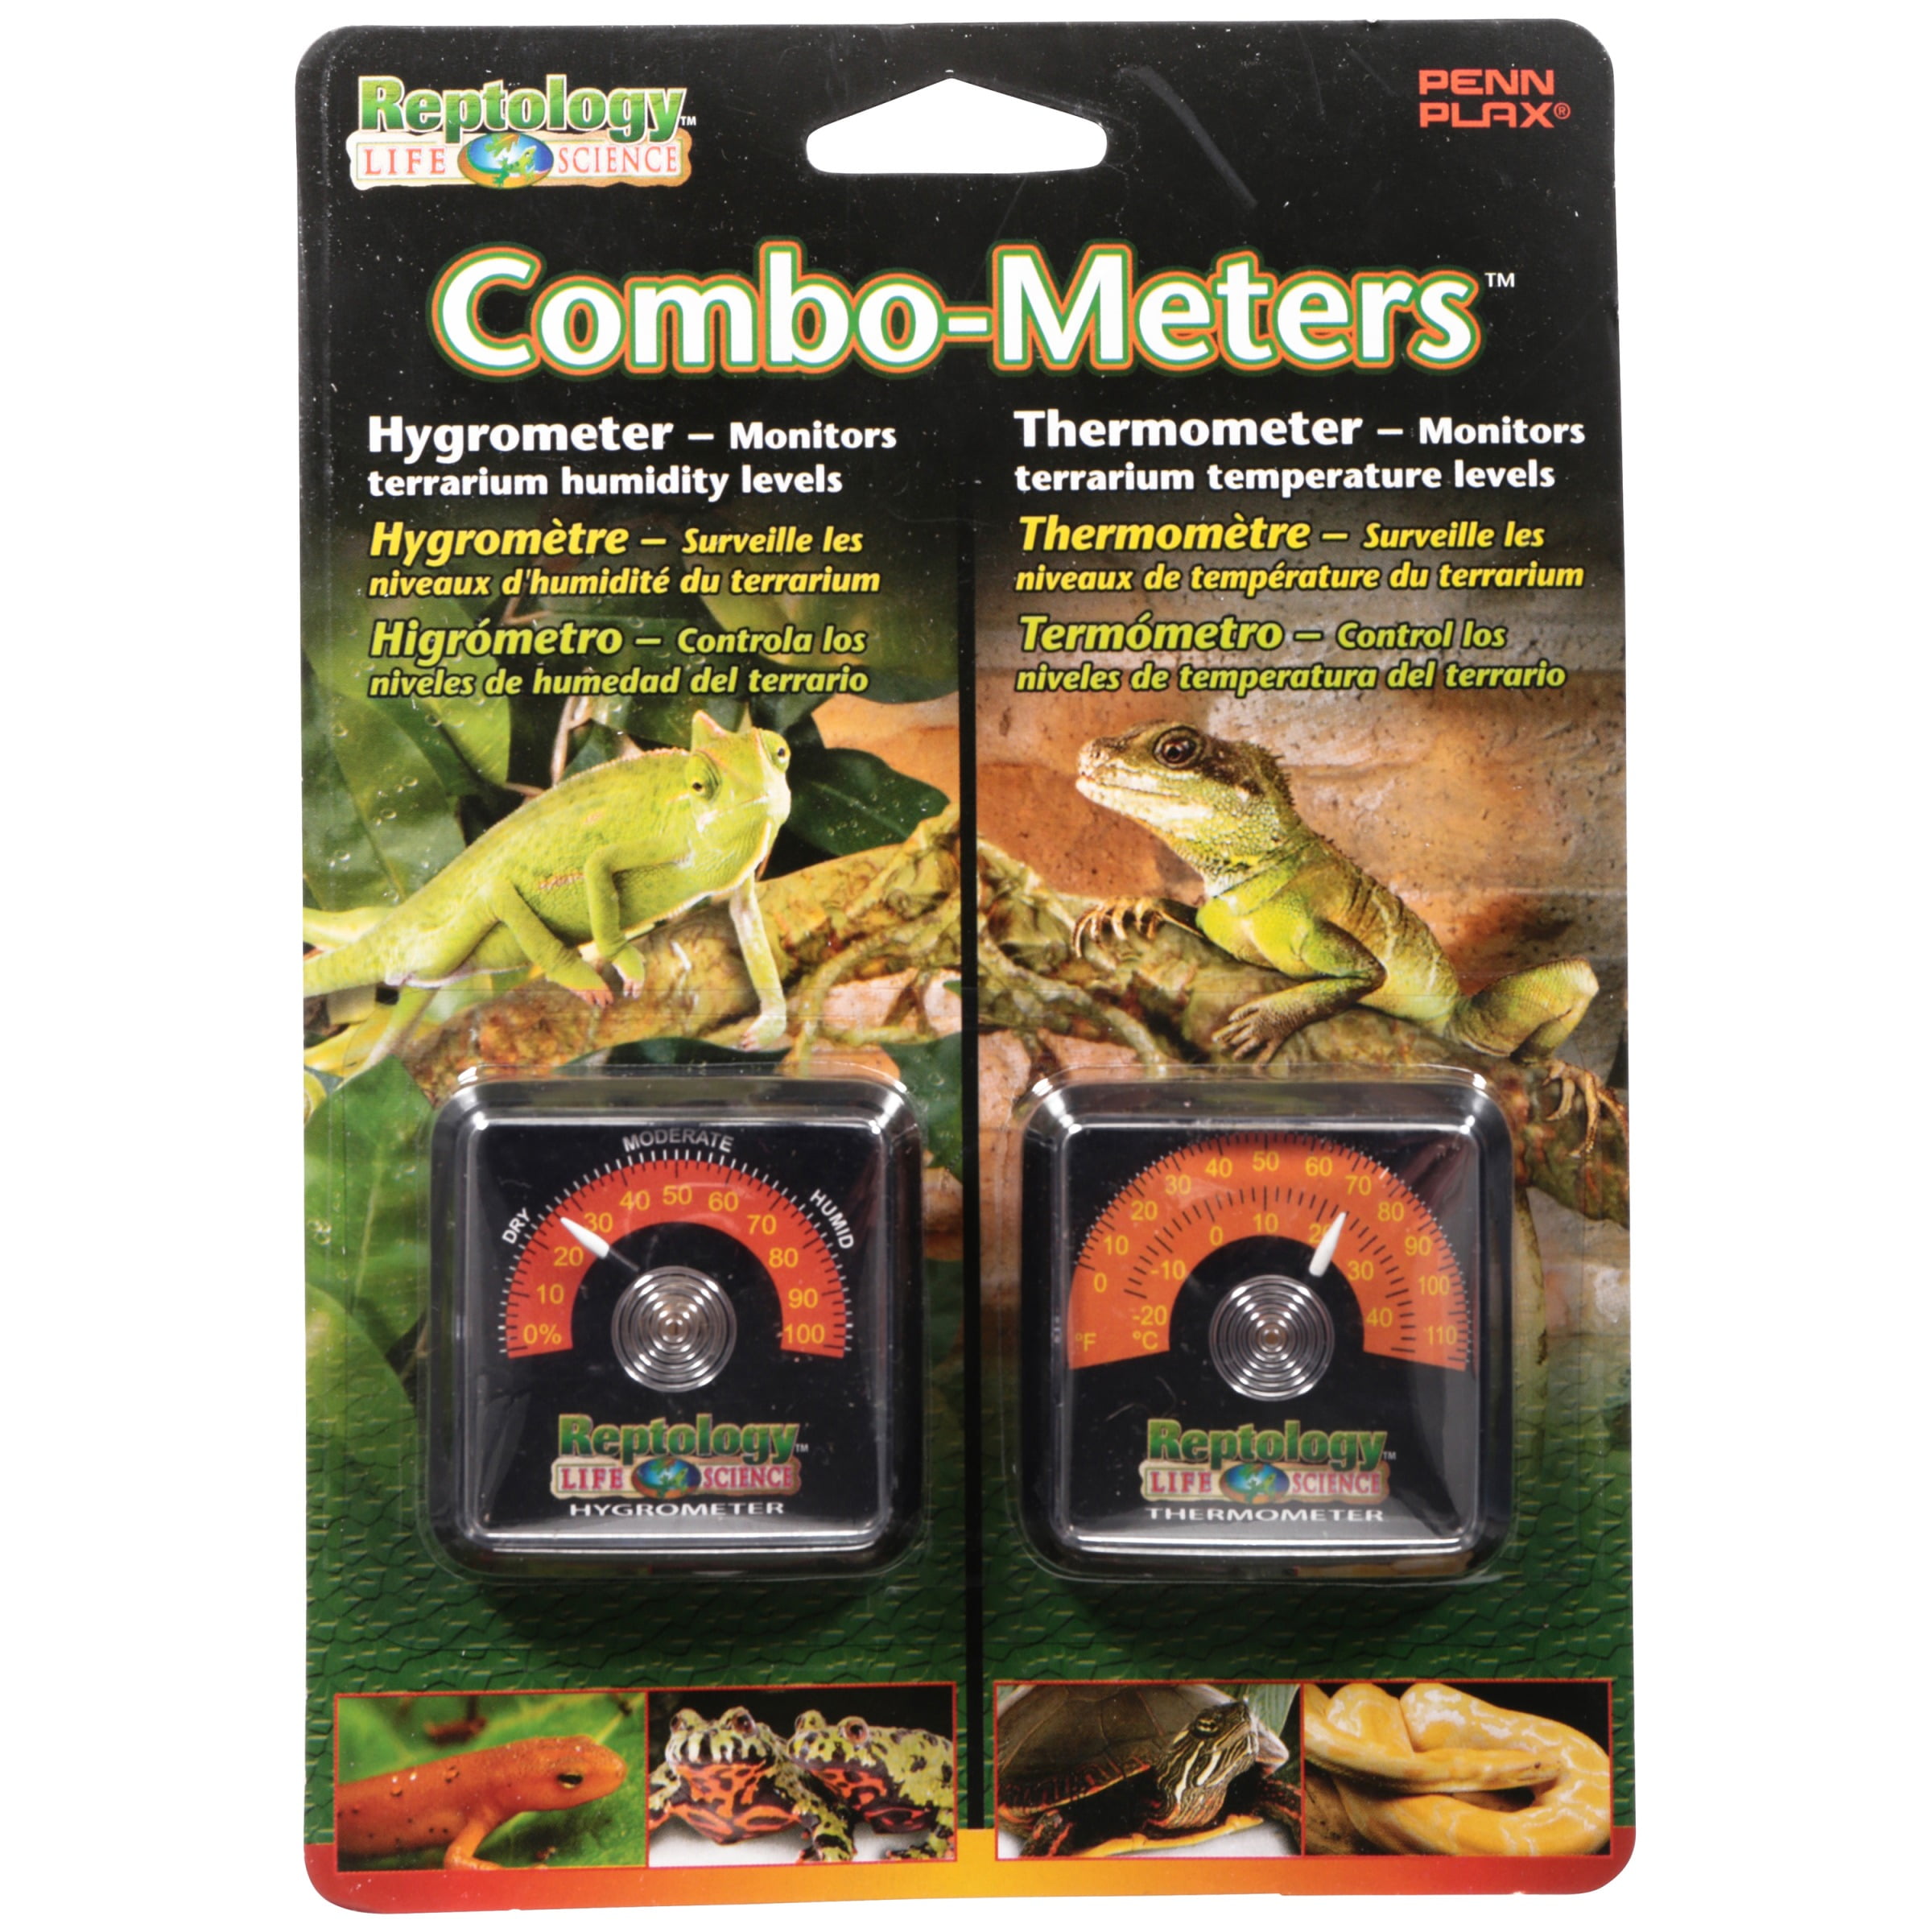 Best reptile thermometers & hygrometers - SwitchBot Blog